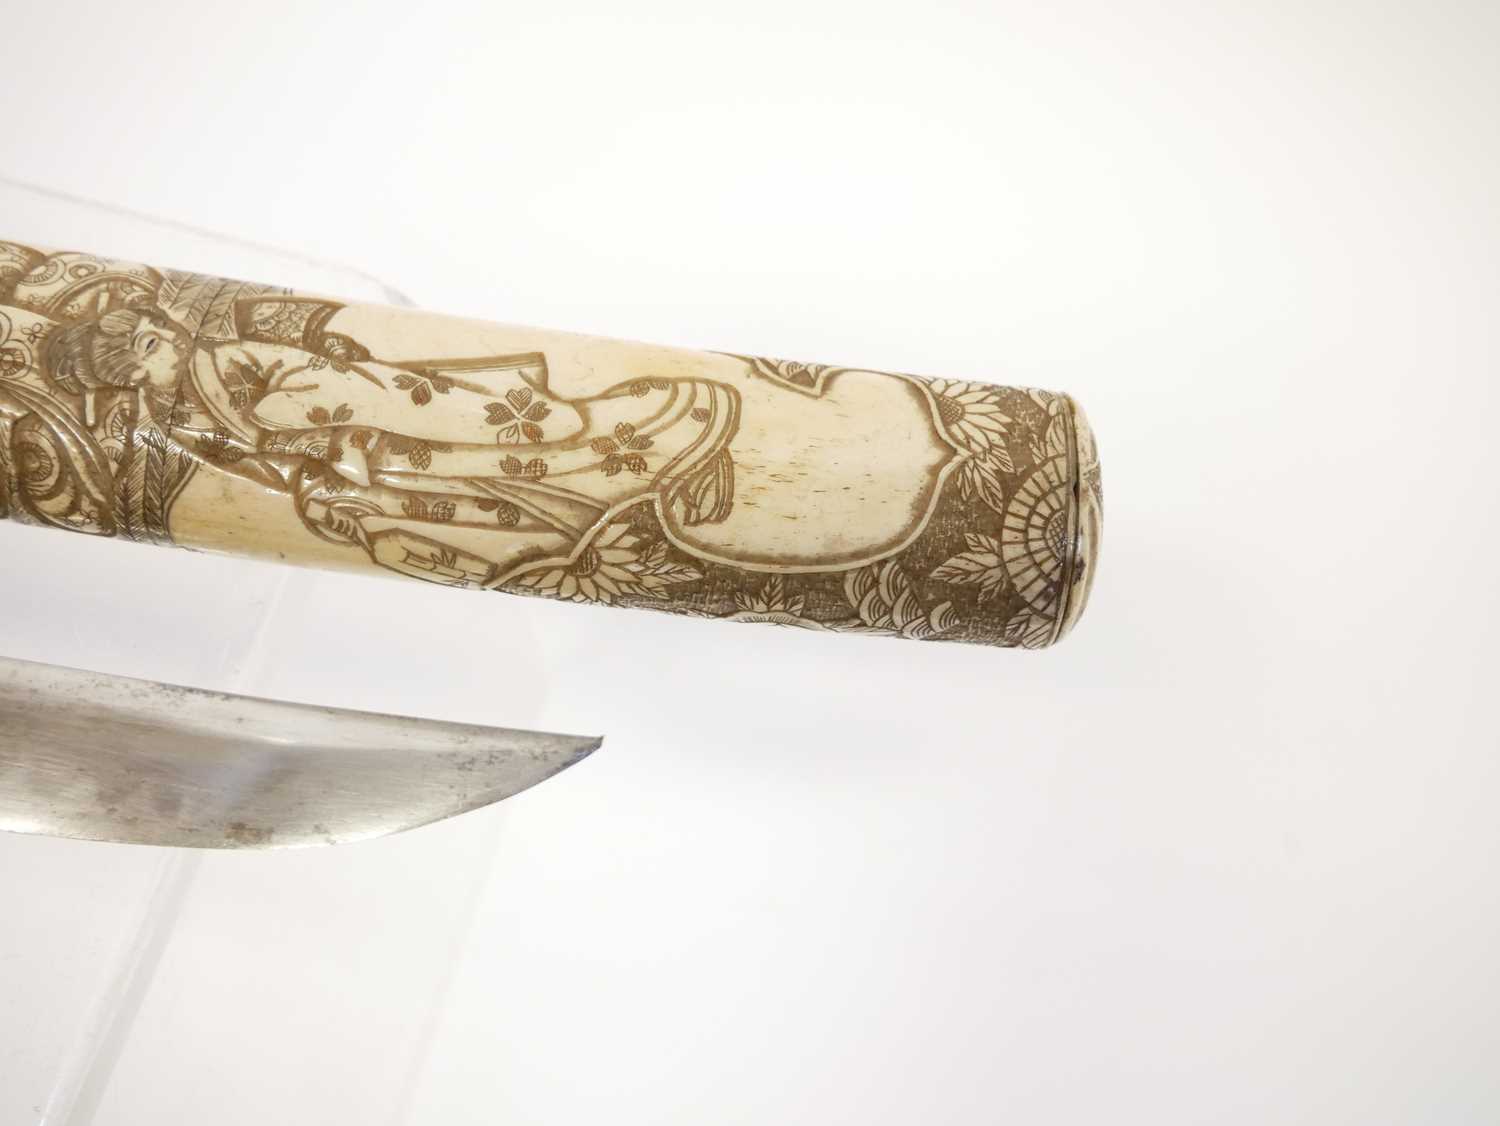 Japanese bone mounted tanto dagger, slightly curved 11inch cutting edge blade, the mounts carved and - Image 6 of 14